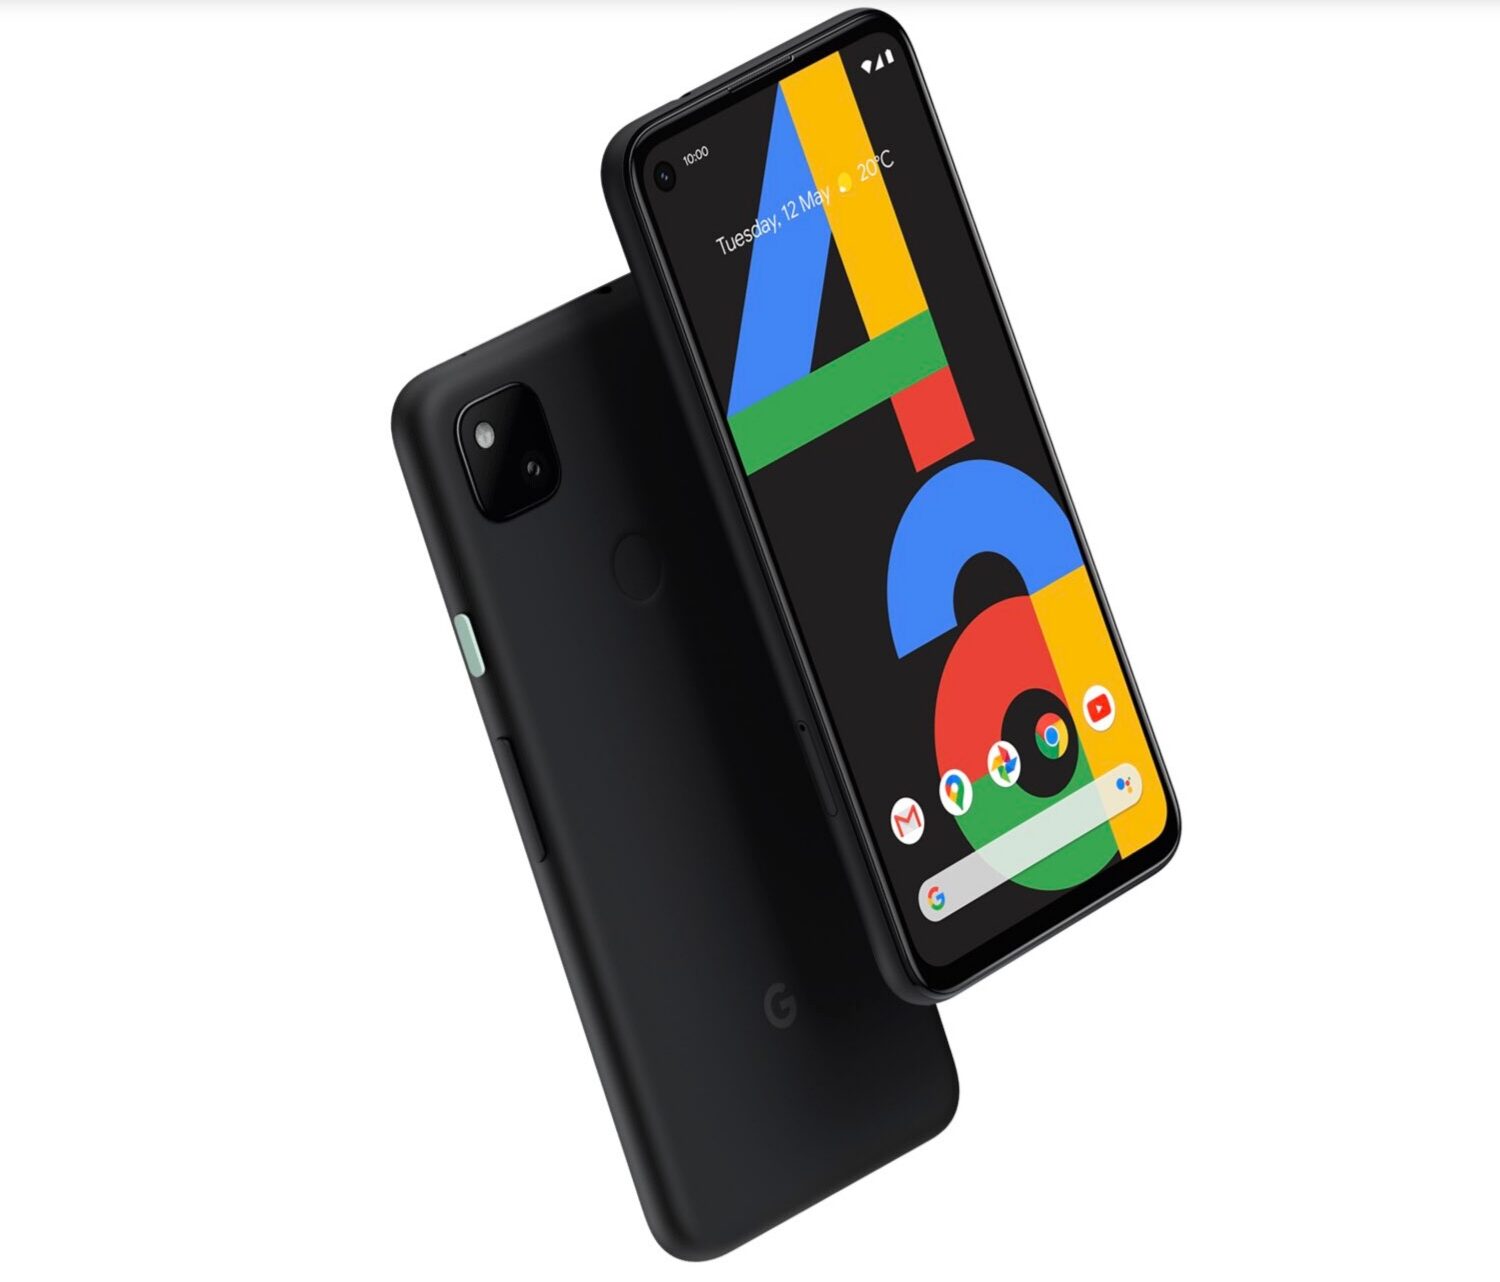 Google Pixel 4a with 5.8-inch display and Snapdragon 730G mobile platform launching in India on October 17